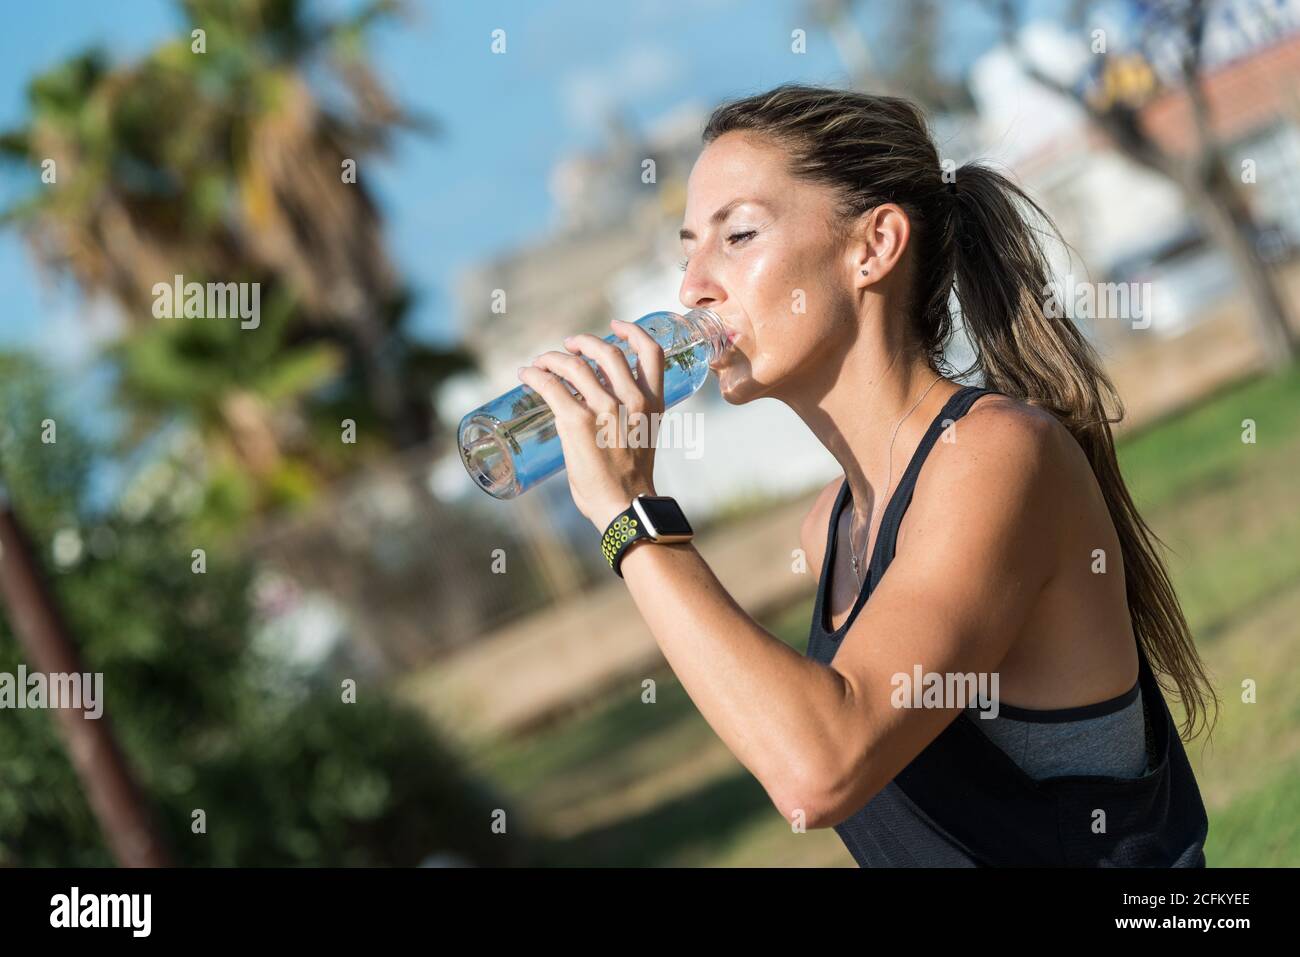 Slim female athlete in sportswear standing drinking water from bottle on sports ground and relaxing during workout on sunny day Stock Photo